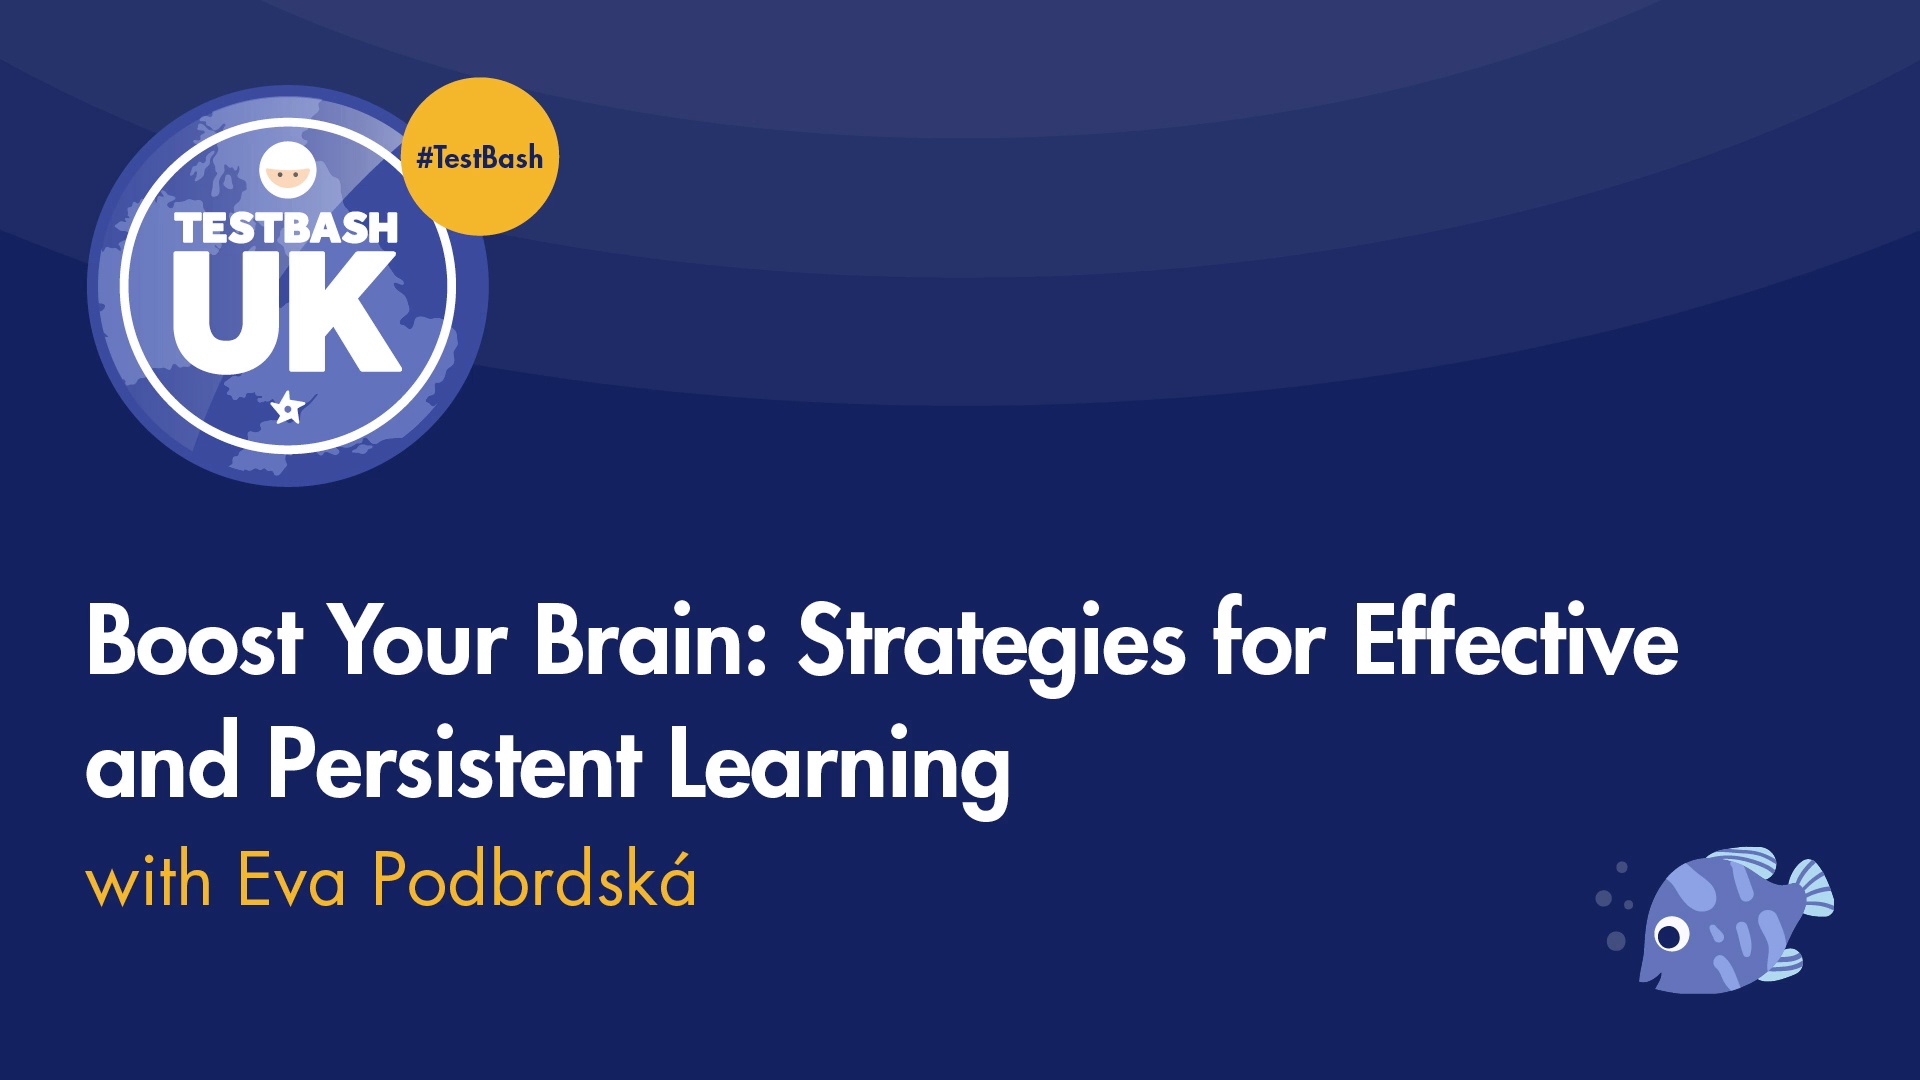 Boost Your Brain: Strategies for Effective and Persistent Learning